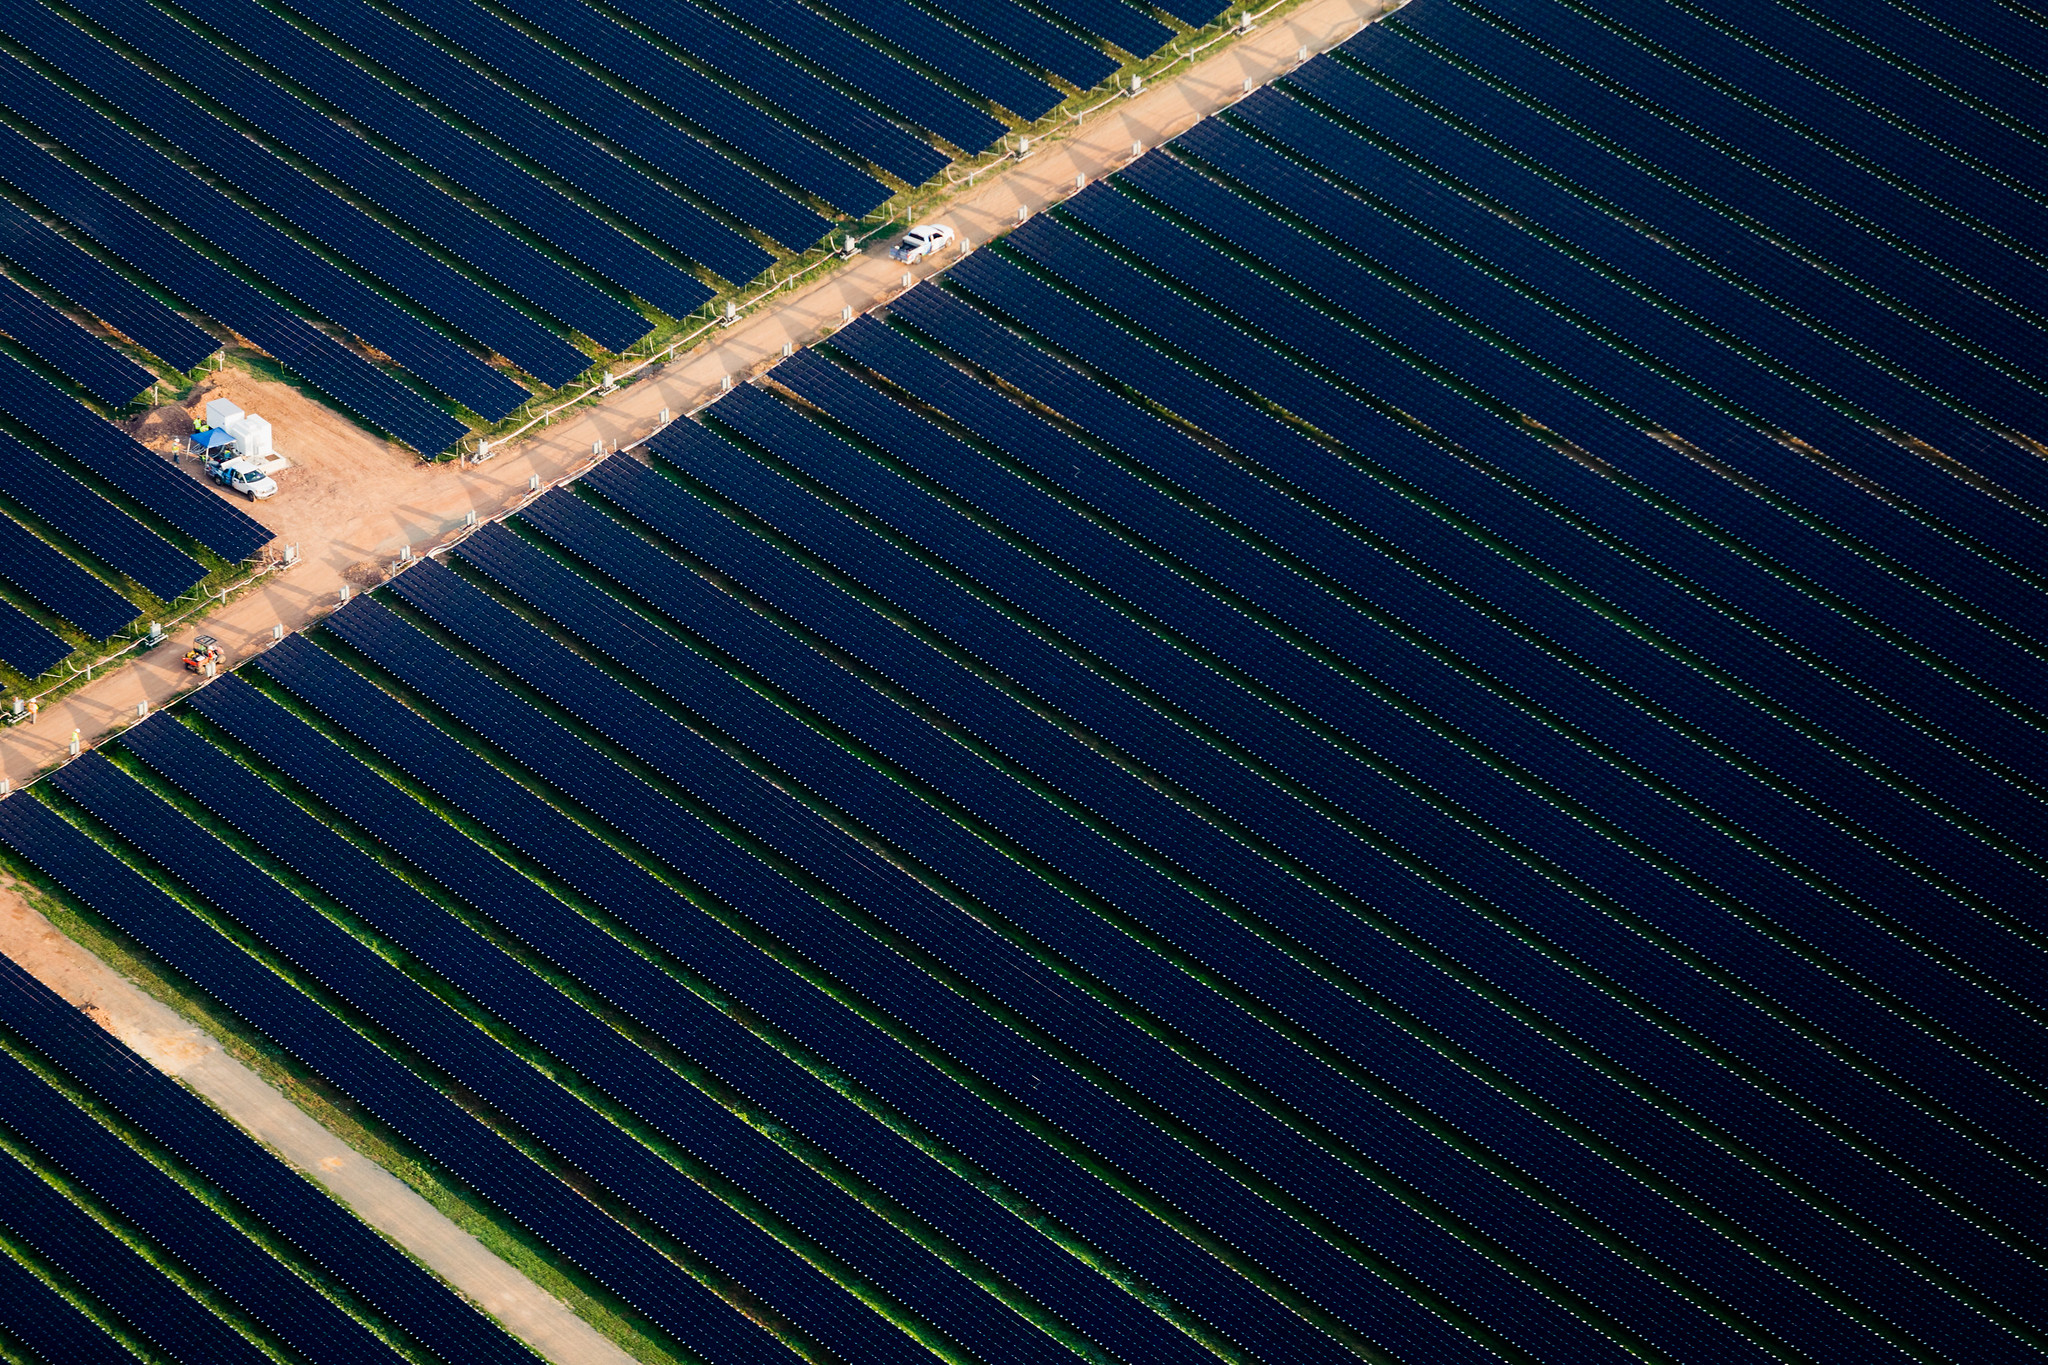 Rows upon rows of solar panels, seen from above.